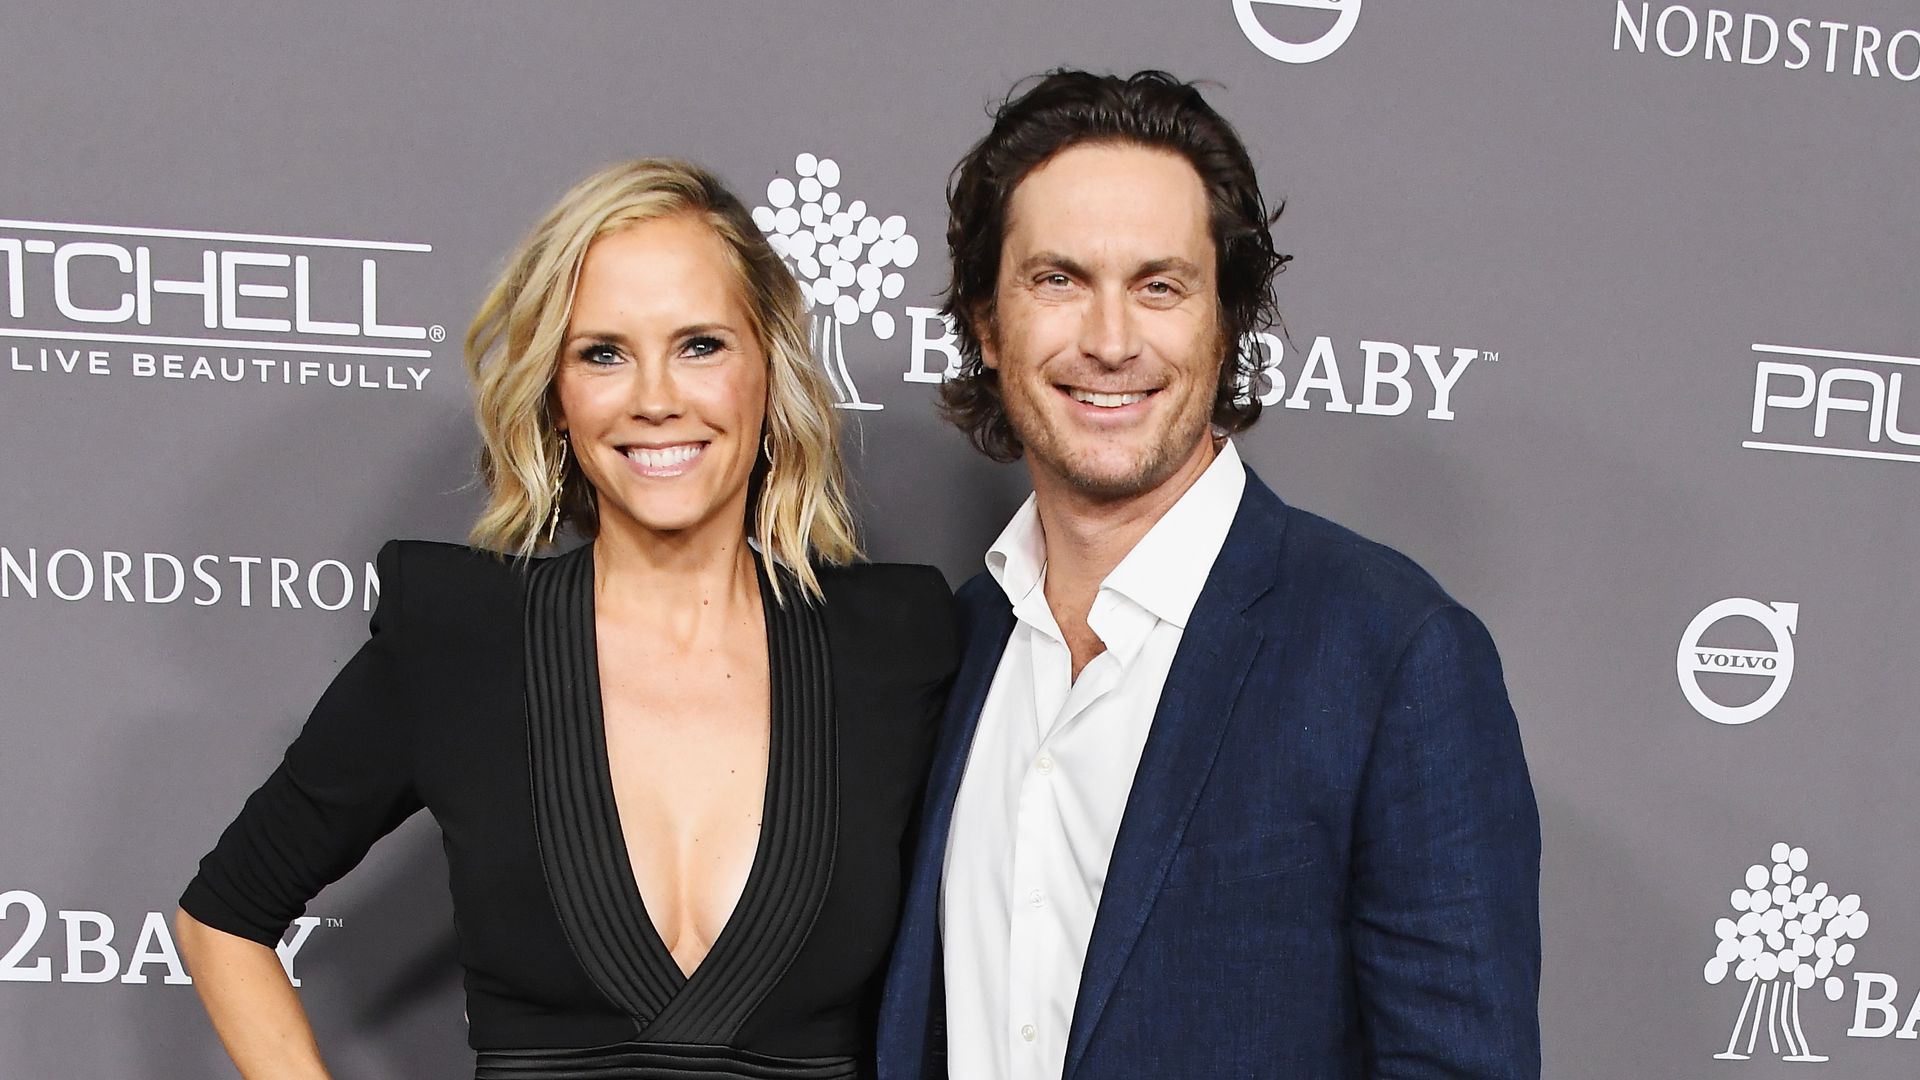 Goldie Hawn's son Oliver Hudson admits he cheated on his wife before their wedding: 'I don't regret it'